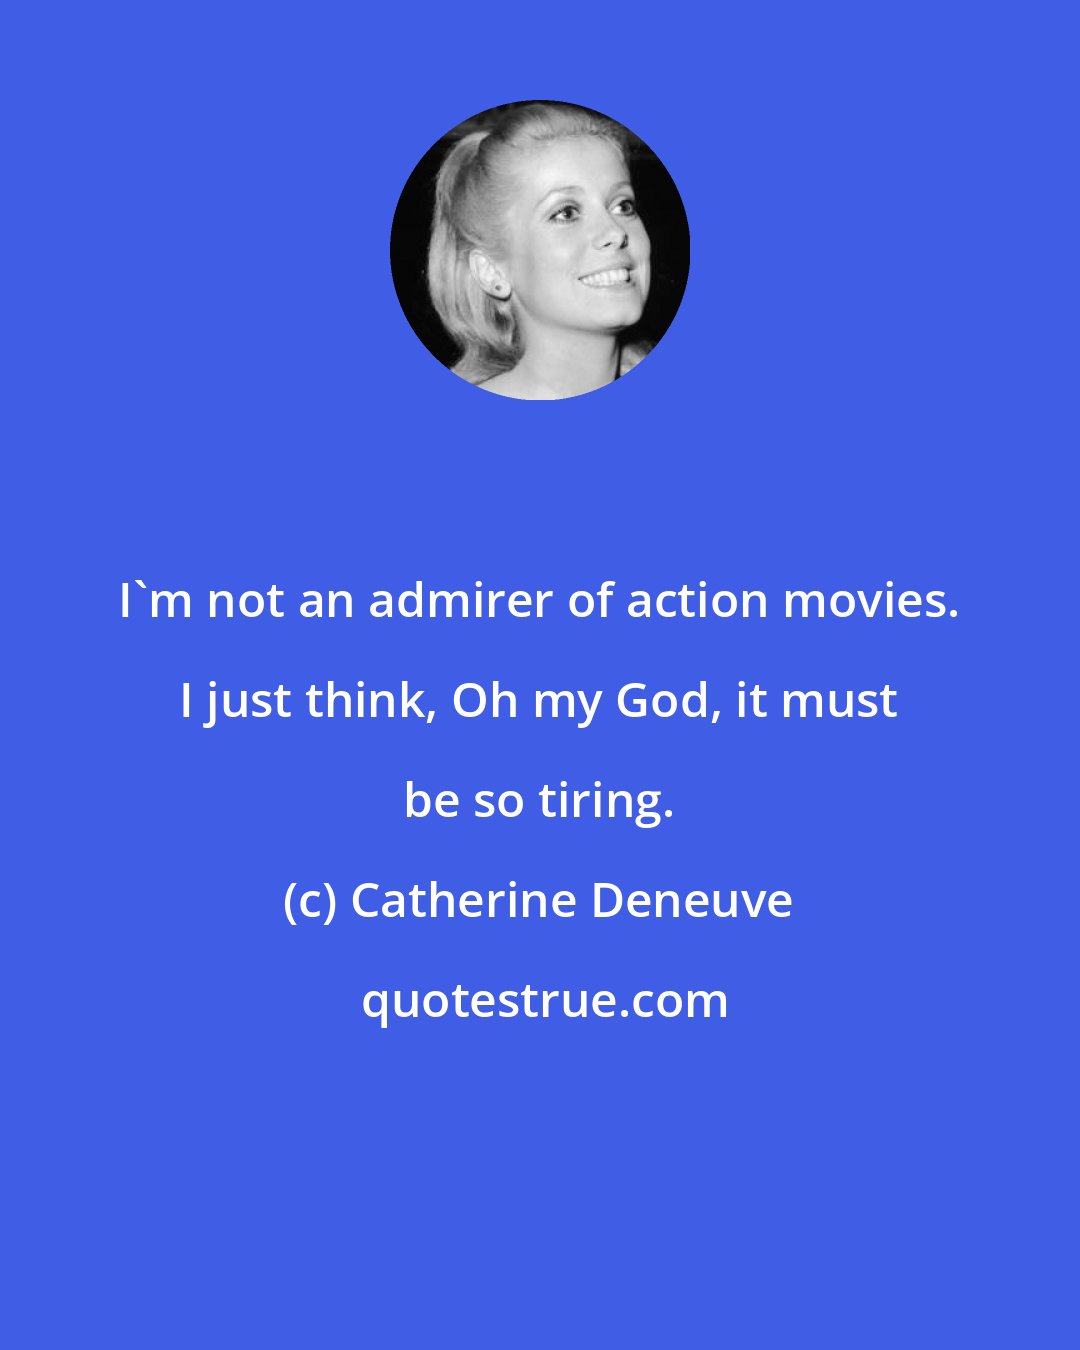 Catherine Deneuve: I'm not an admirer of action movies. I just think, Oh my God, it must be so tiring.